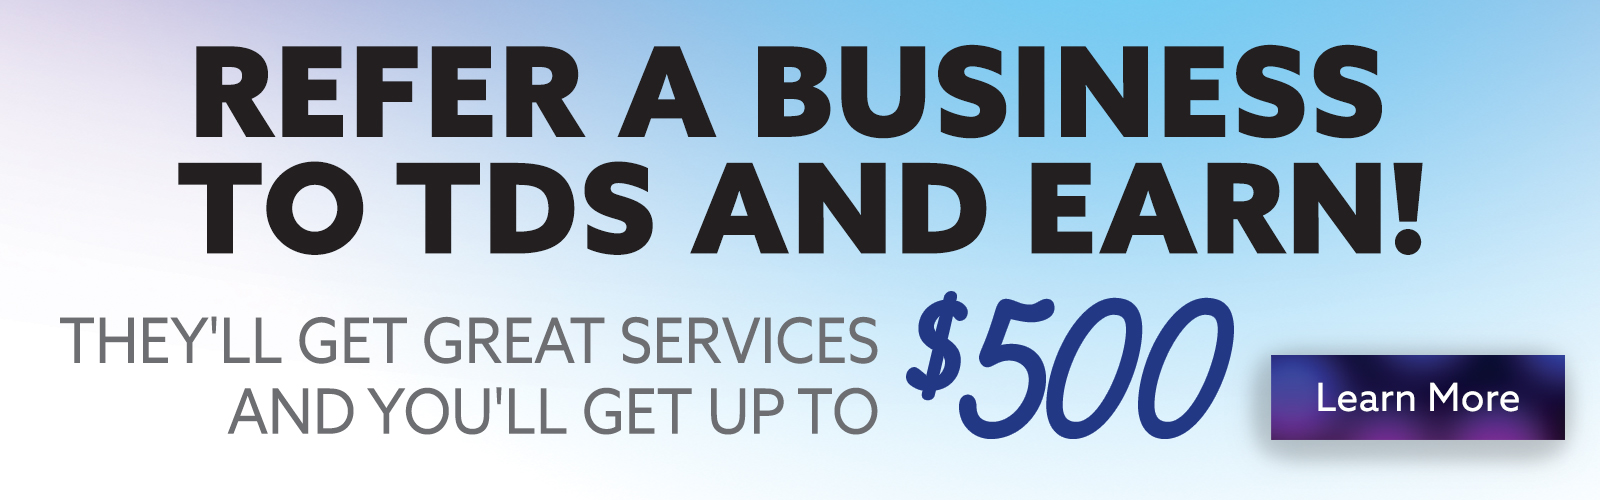 Refer a Business to TDS and Earn! They'll get great services and you'll get up to $500!